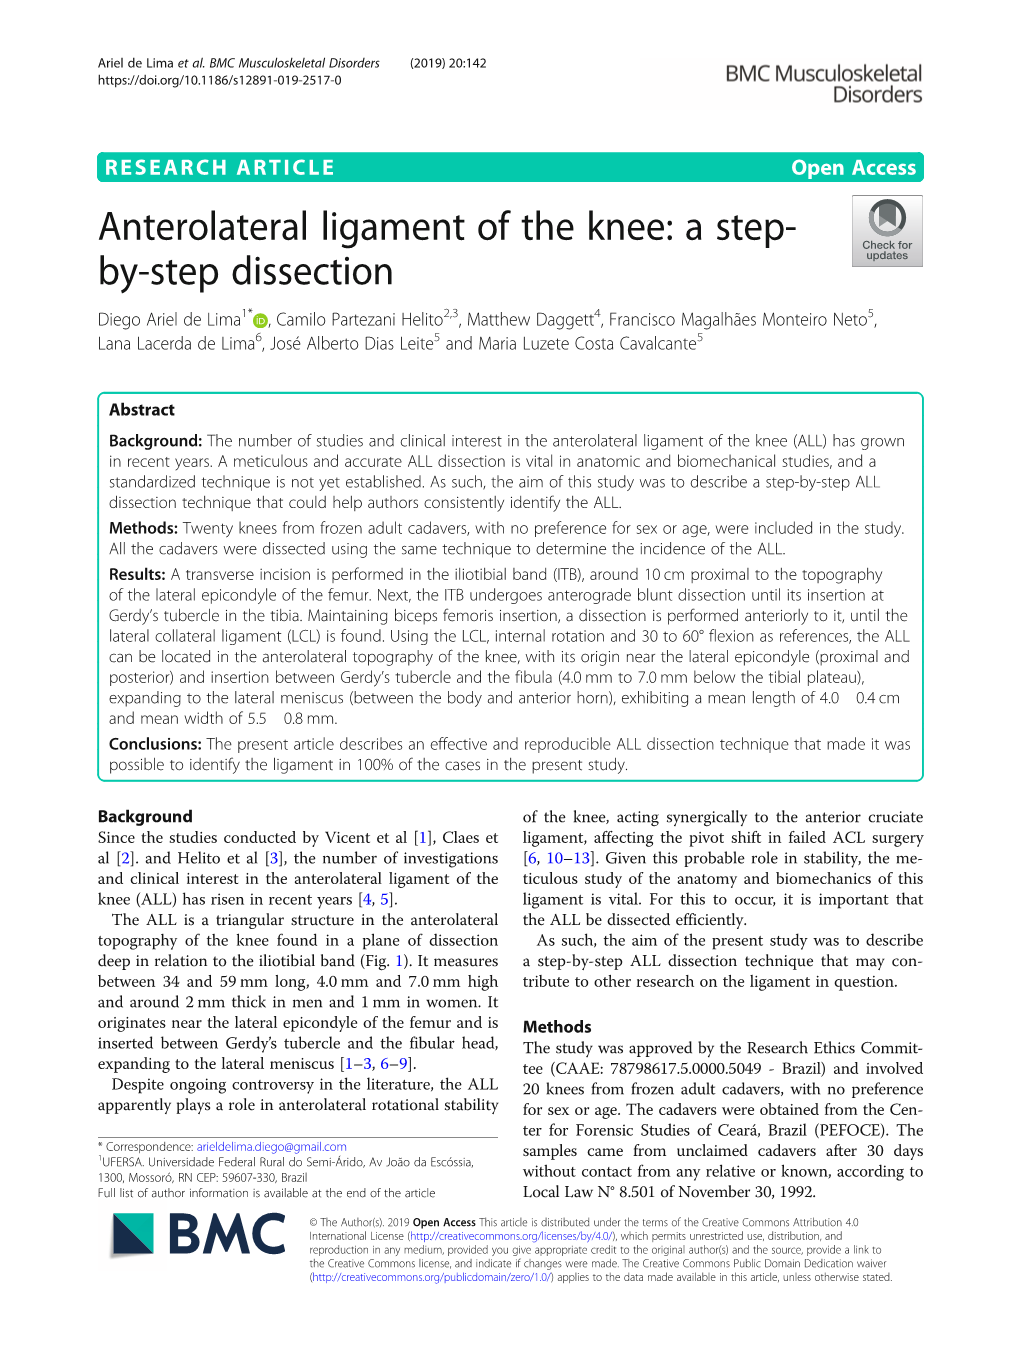 Anterolateral Ligament of the Knee